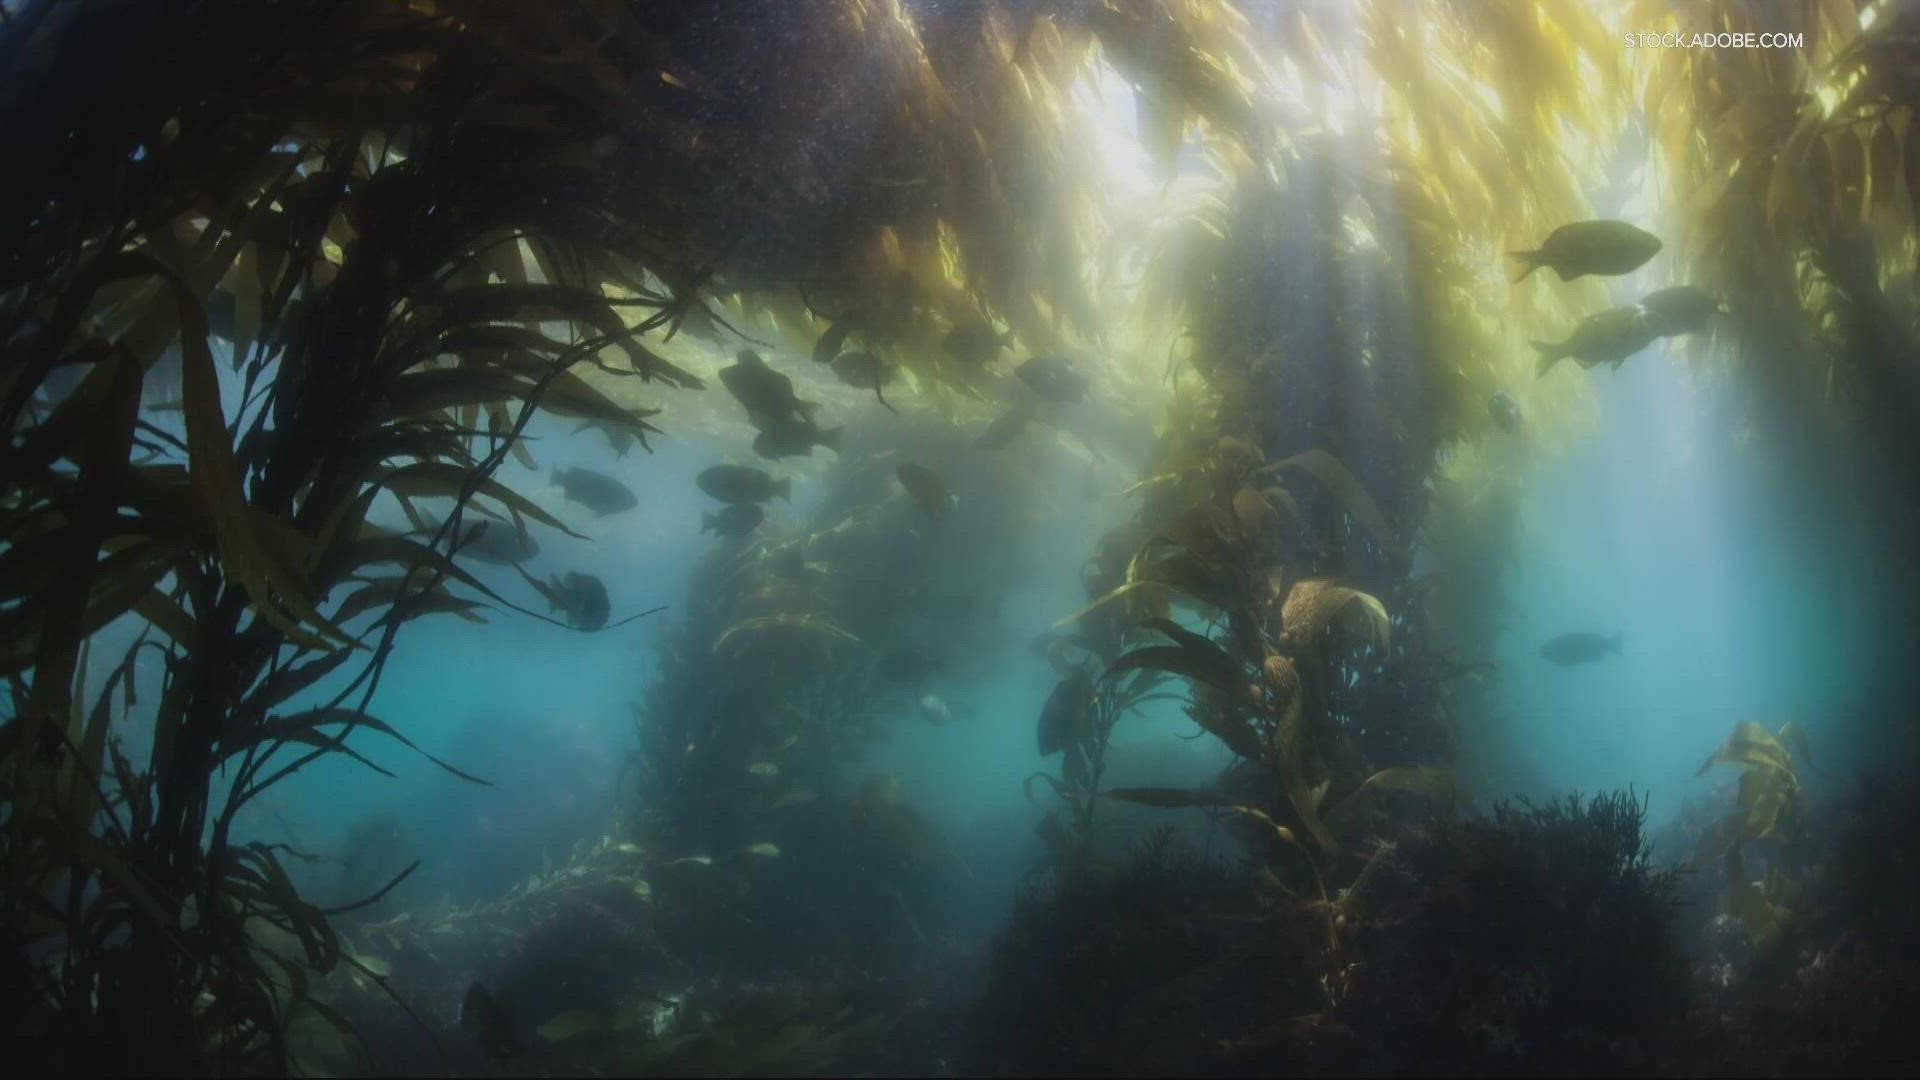 Some kelp forests are dying, impacted by climate change and warming oceans. The plants are essential to the ecosystem and are found in products people use every day.